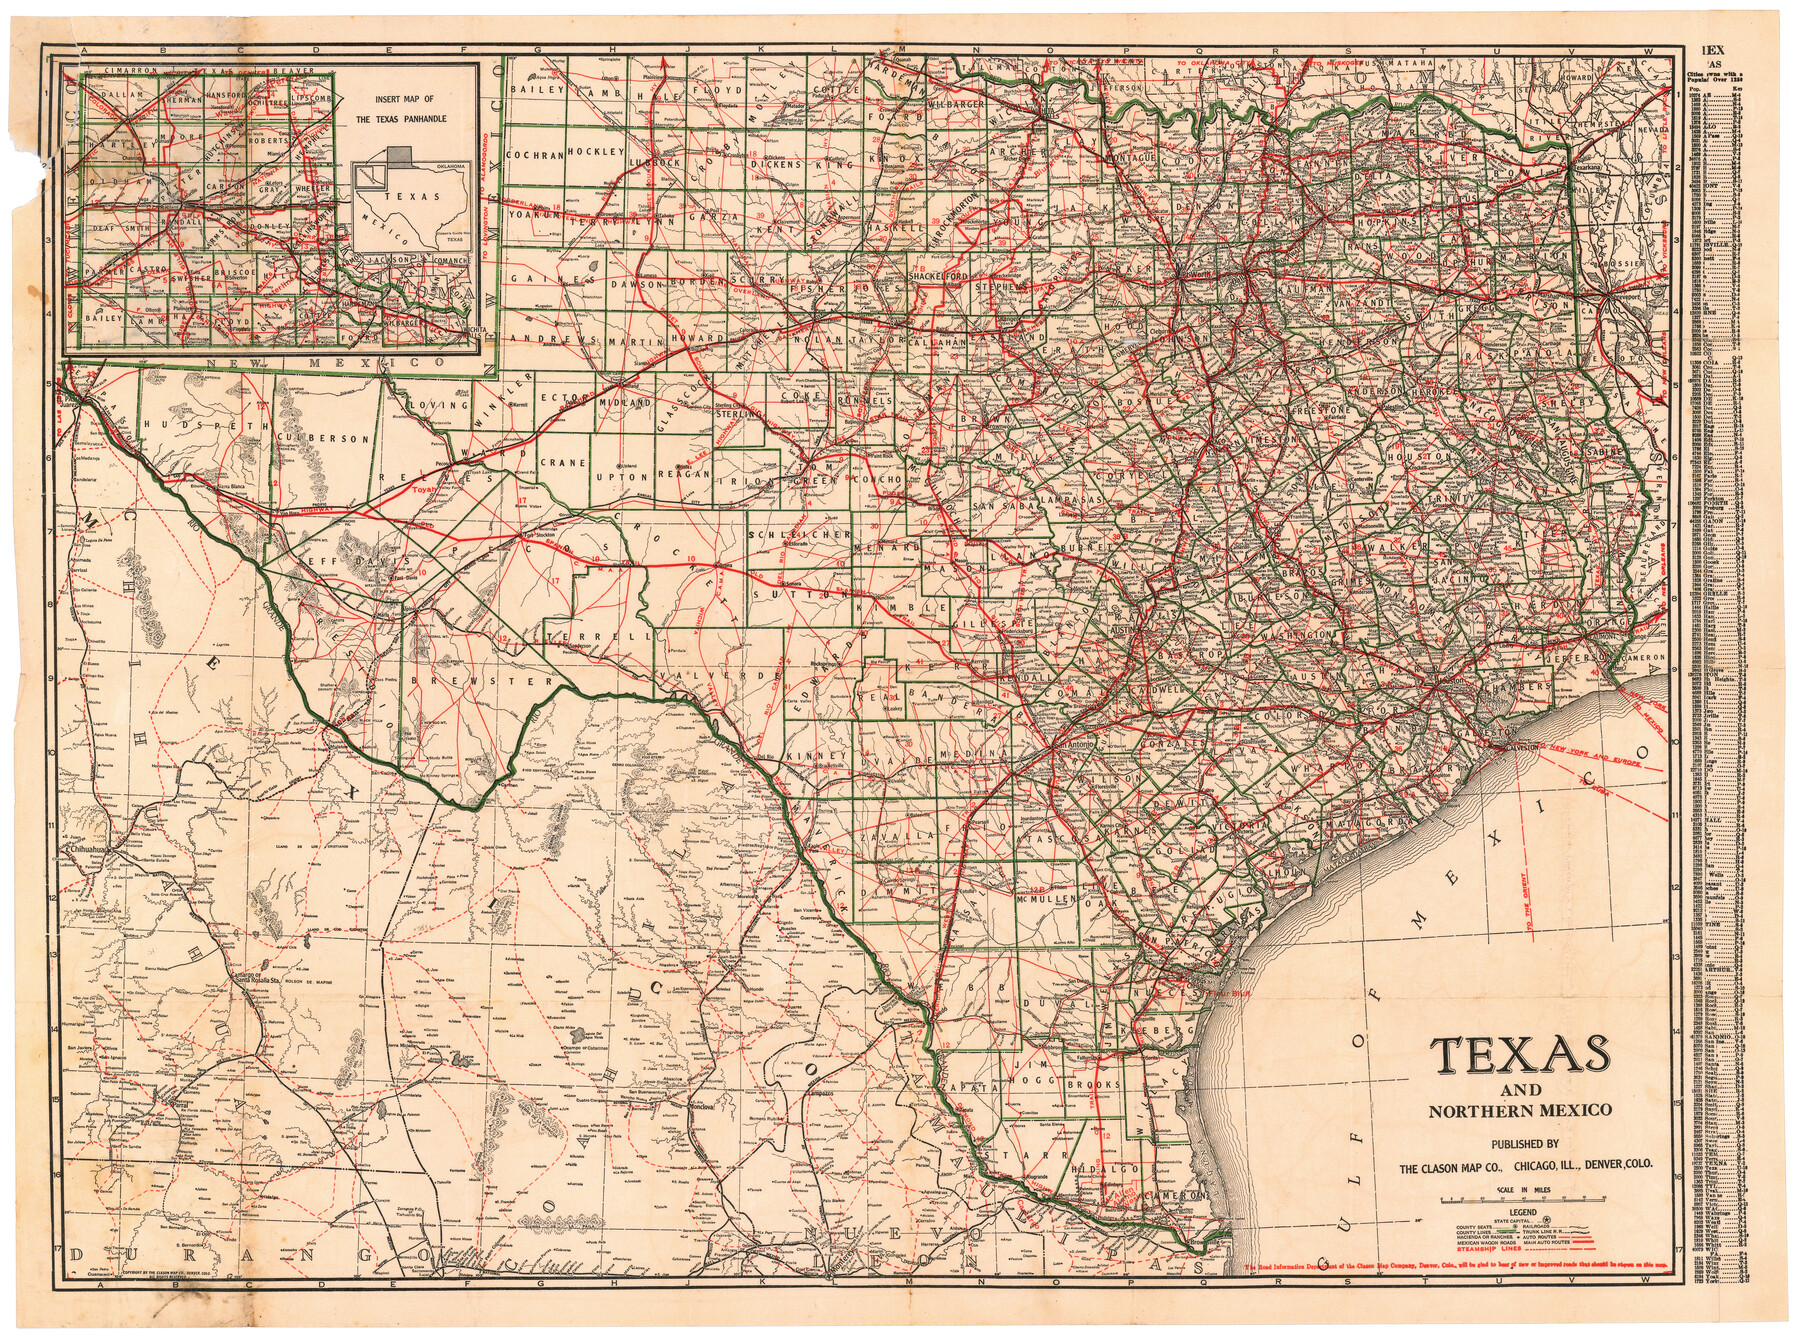 95900, Texas and Northern Mexico, Cobb Digital Map Collection - 1